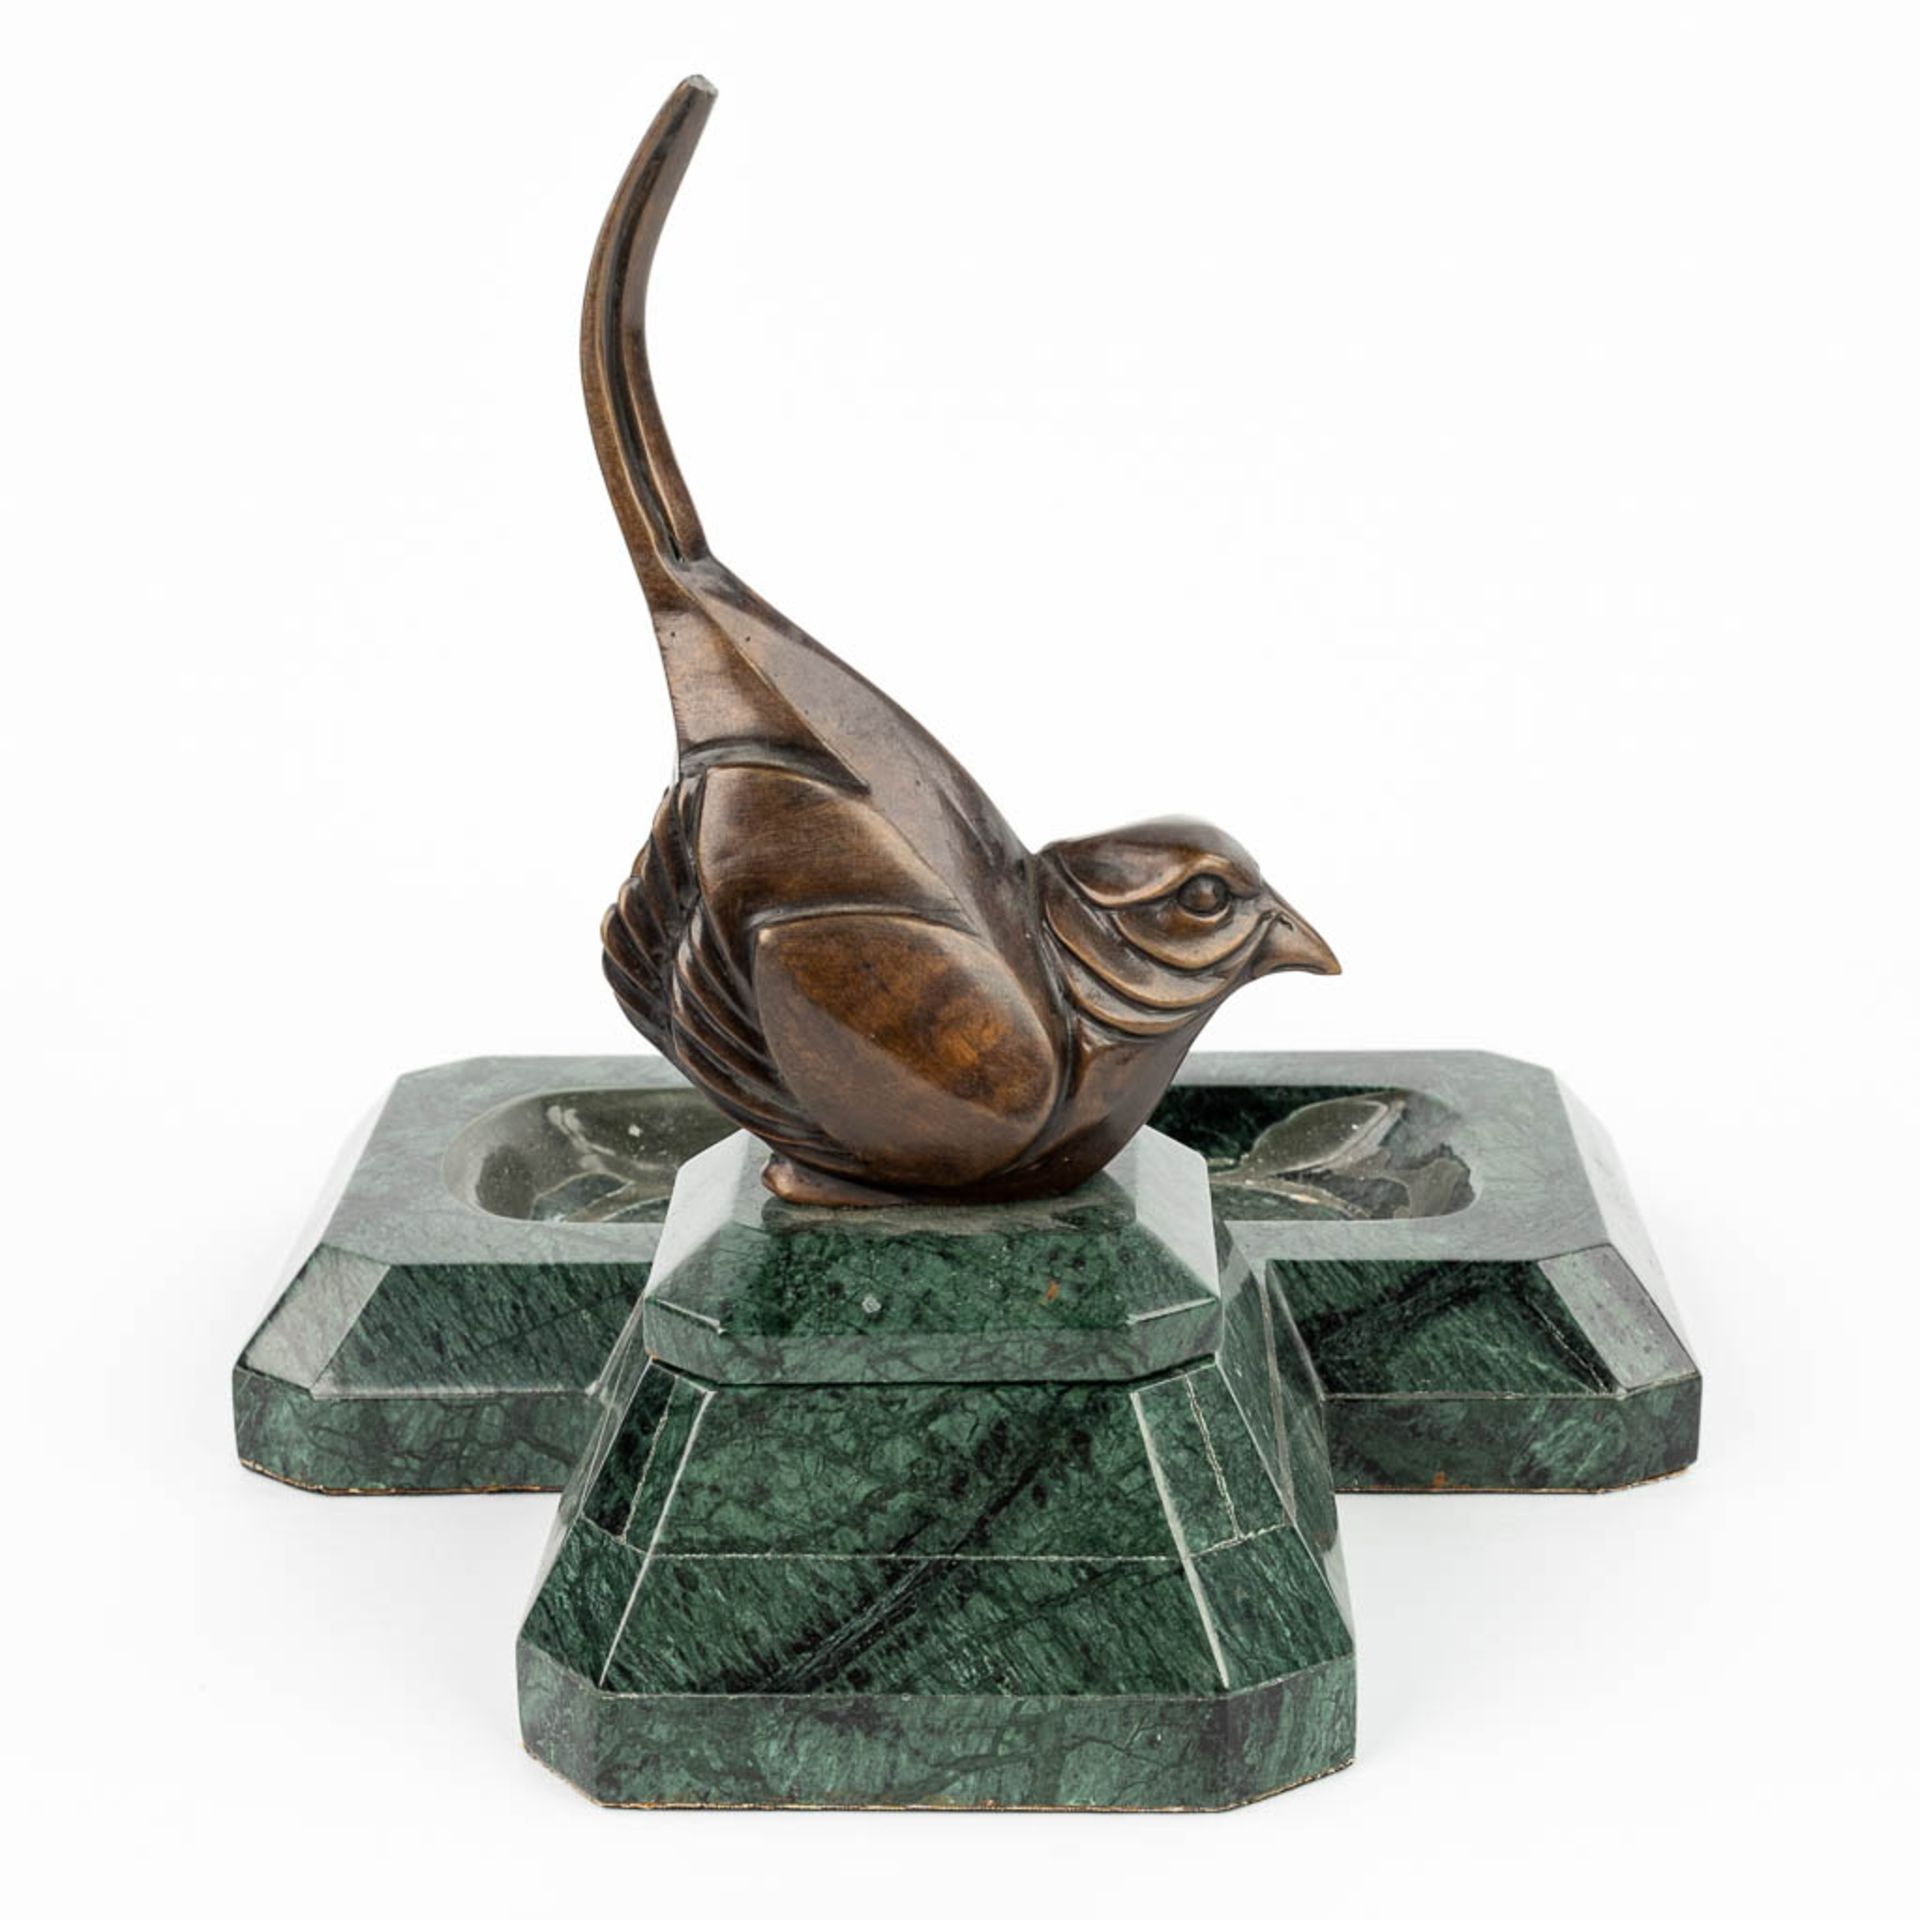 A 'Vide Poche' made of marble with a bird made of bronze in art deco style. - Image 8 of 10